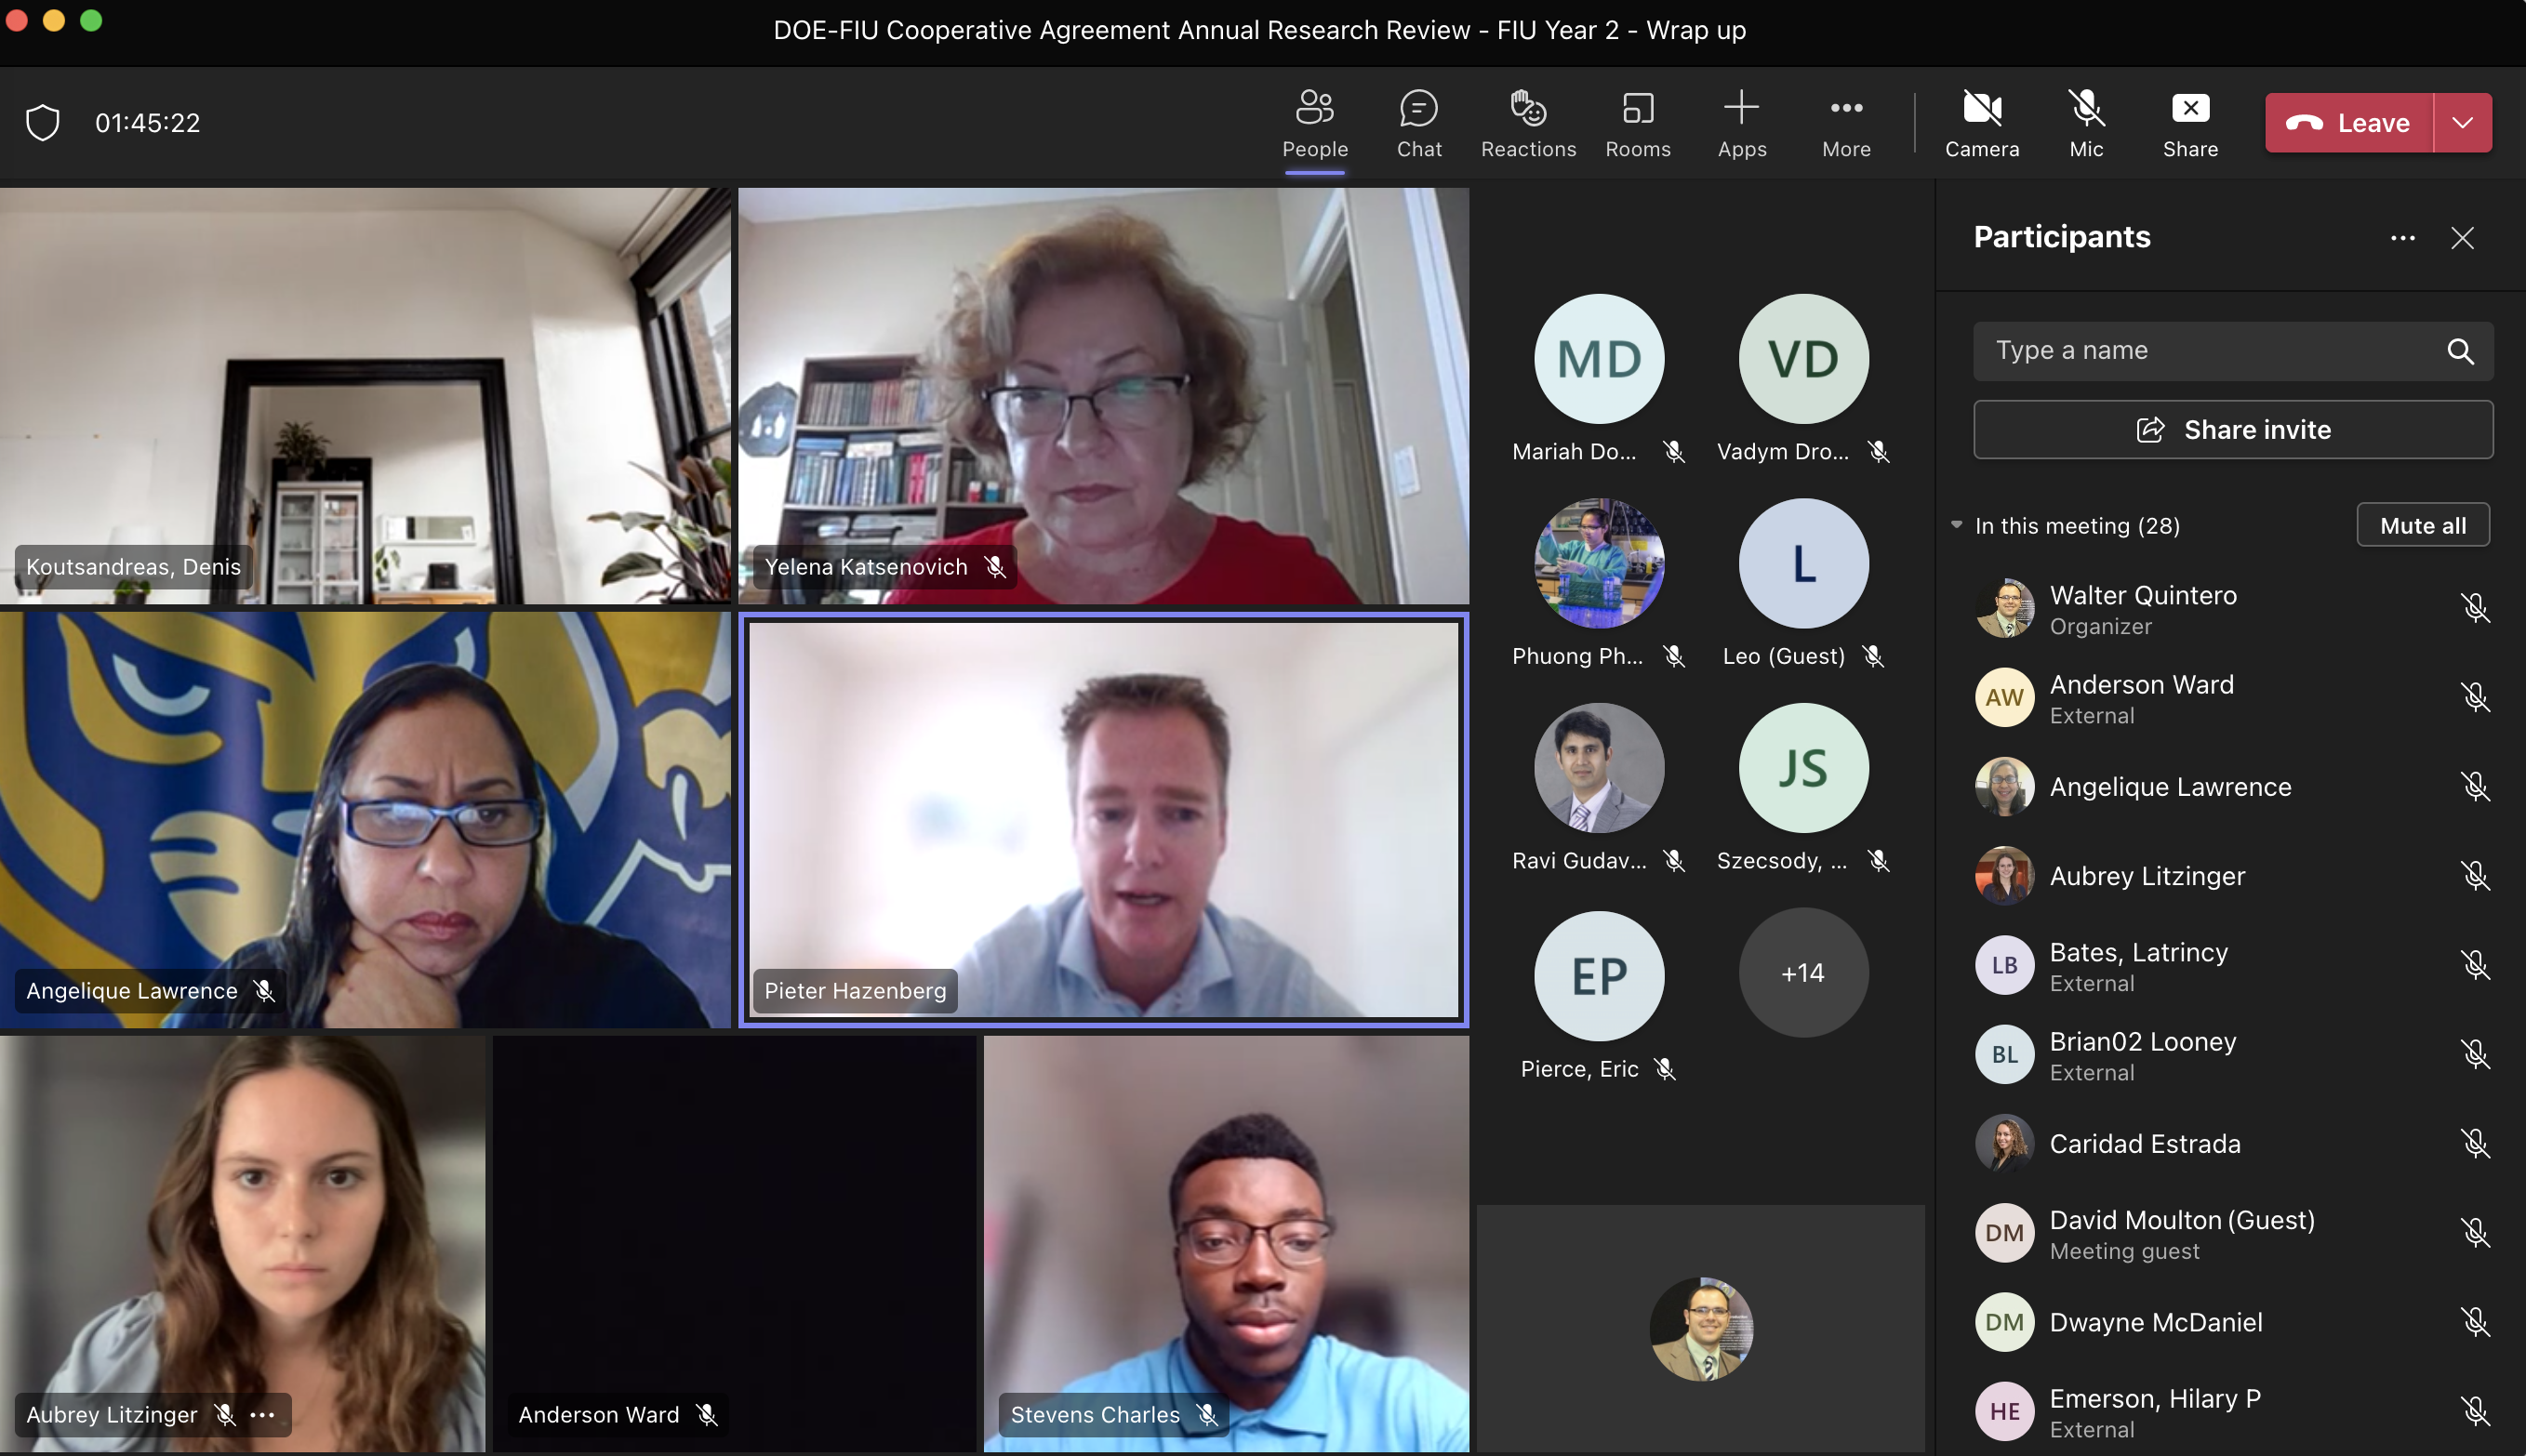 FIU’s Applied Research Center researchers and DOE Fellows participating virtually in the Annual Research Review (left to right): Top Row: Yelena Katsenovich; Middle Row: Angelique Lawrence, Pieter Hazenberg; Bottom Row: DOE Fellow Aubrey Litzinger, DOE Fellow, DOE Fellow Stevens Charles